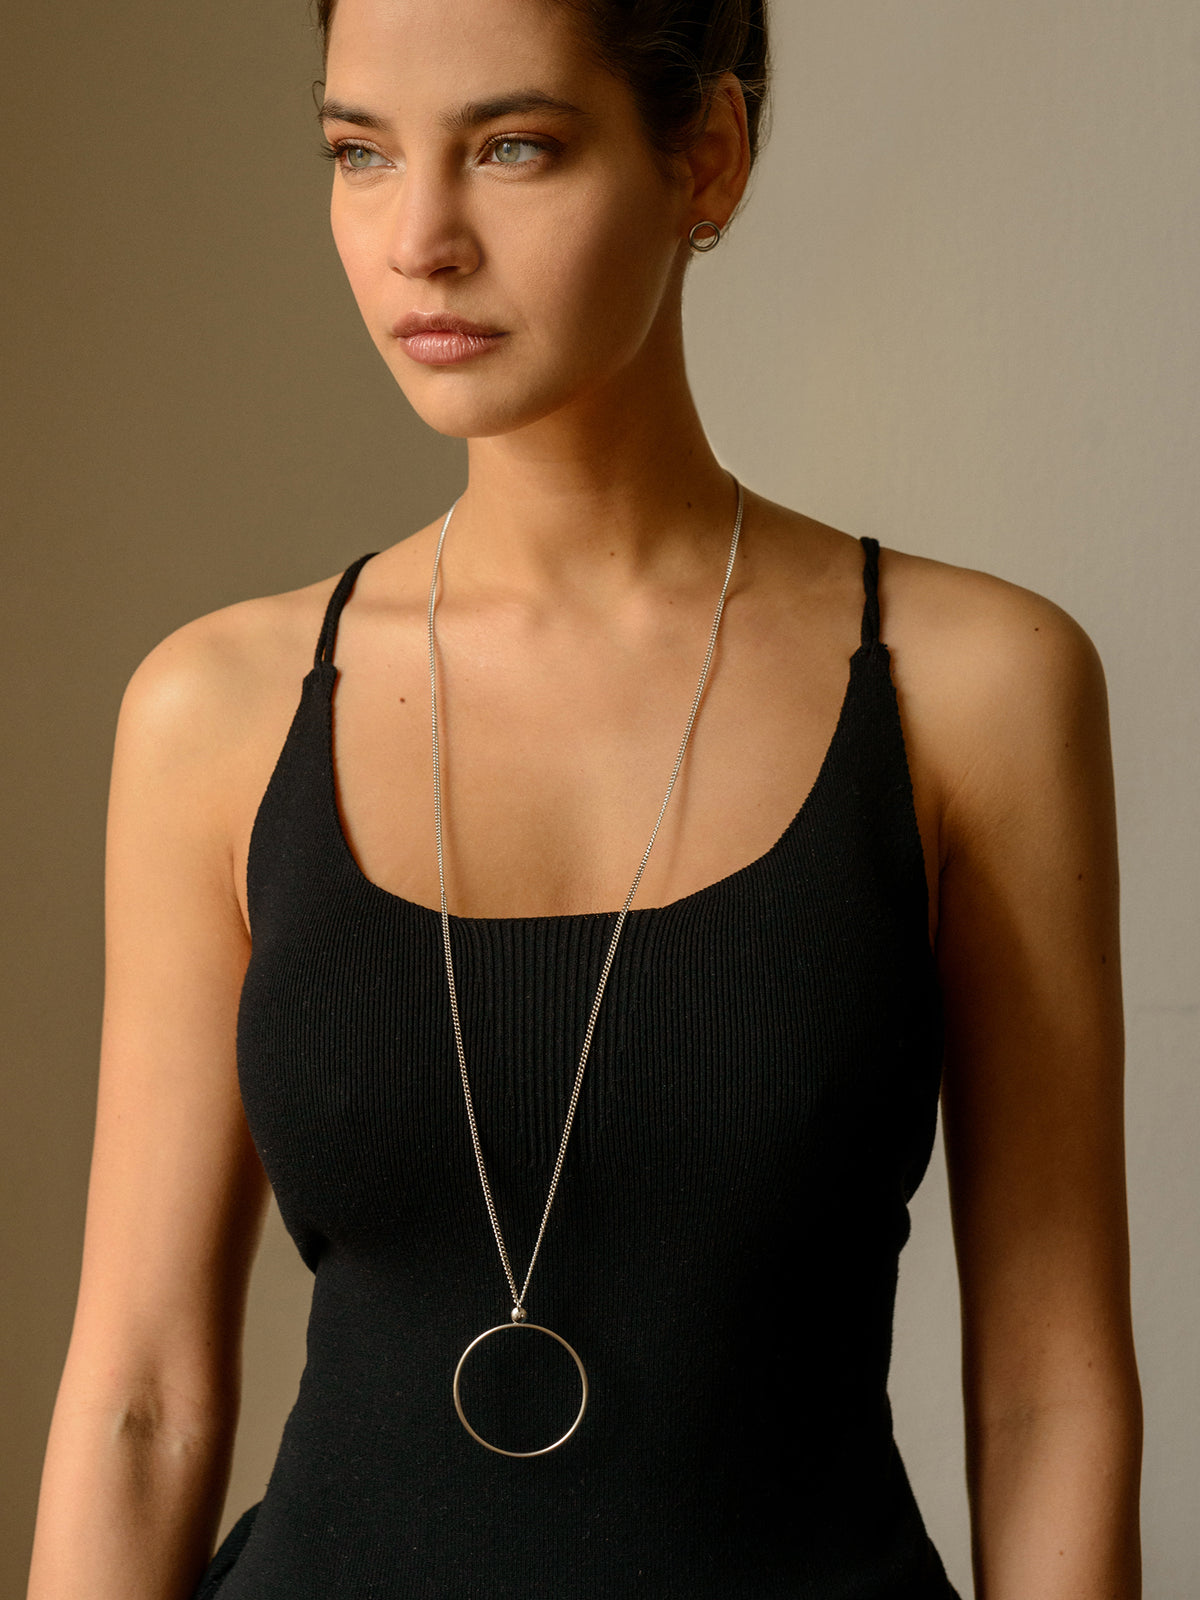 CIRCLE LINES - Sol necklace